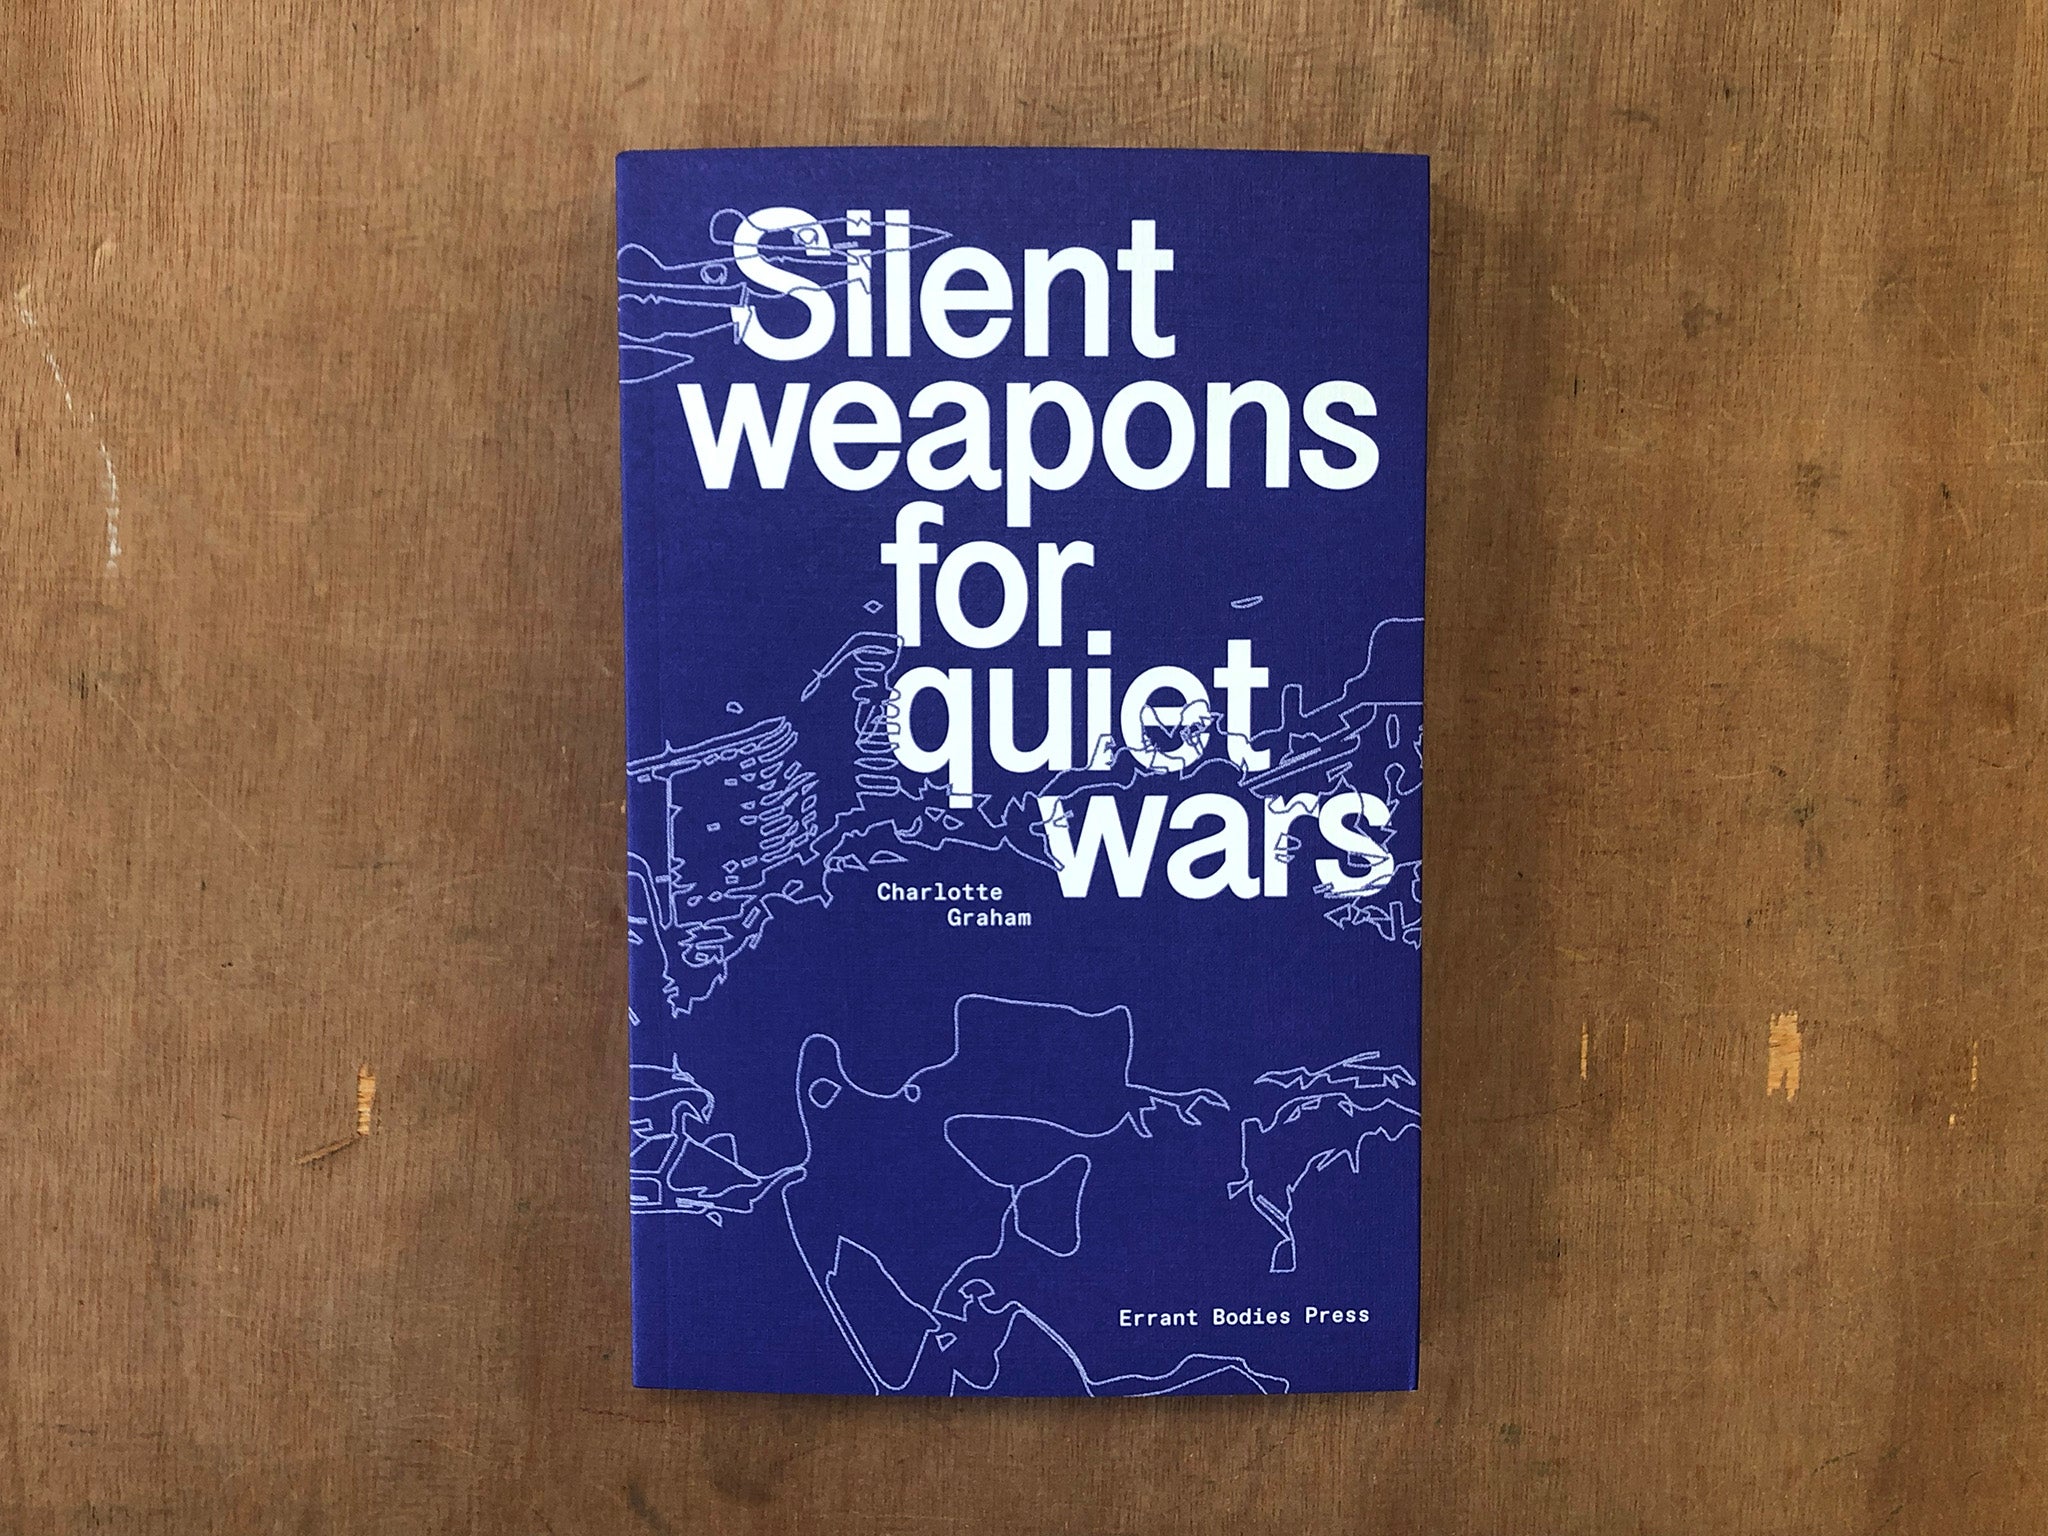 SILENT WEAPONS FOR QUIET WARS by Charlotte Graham